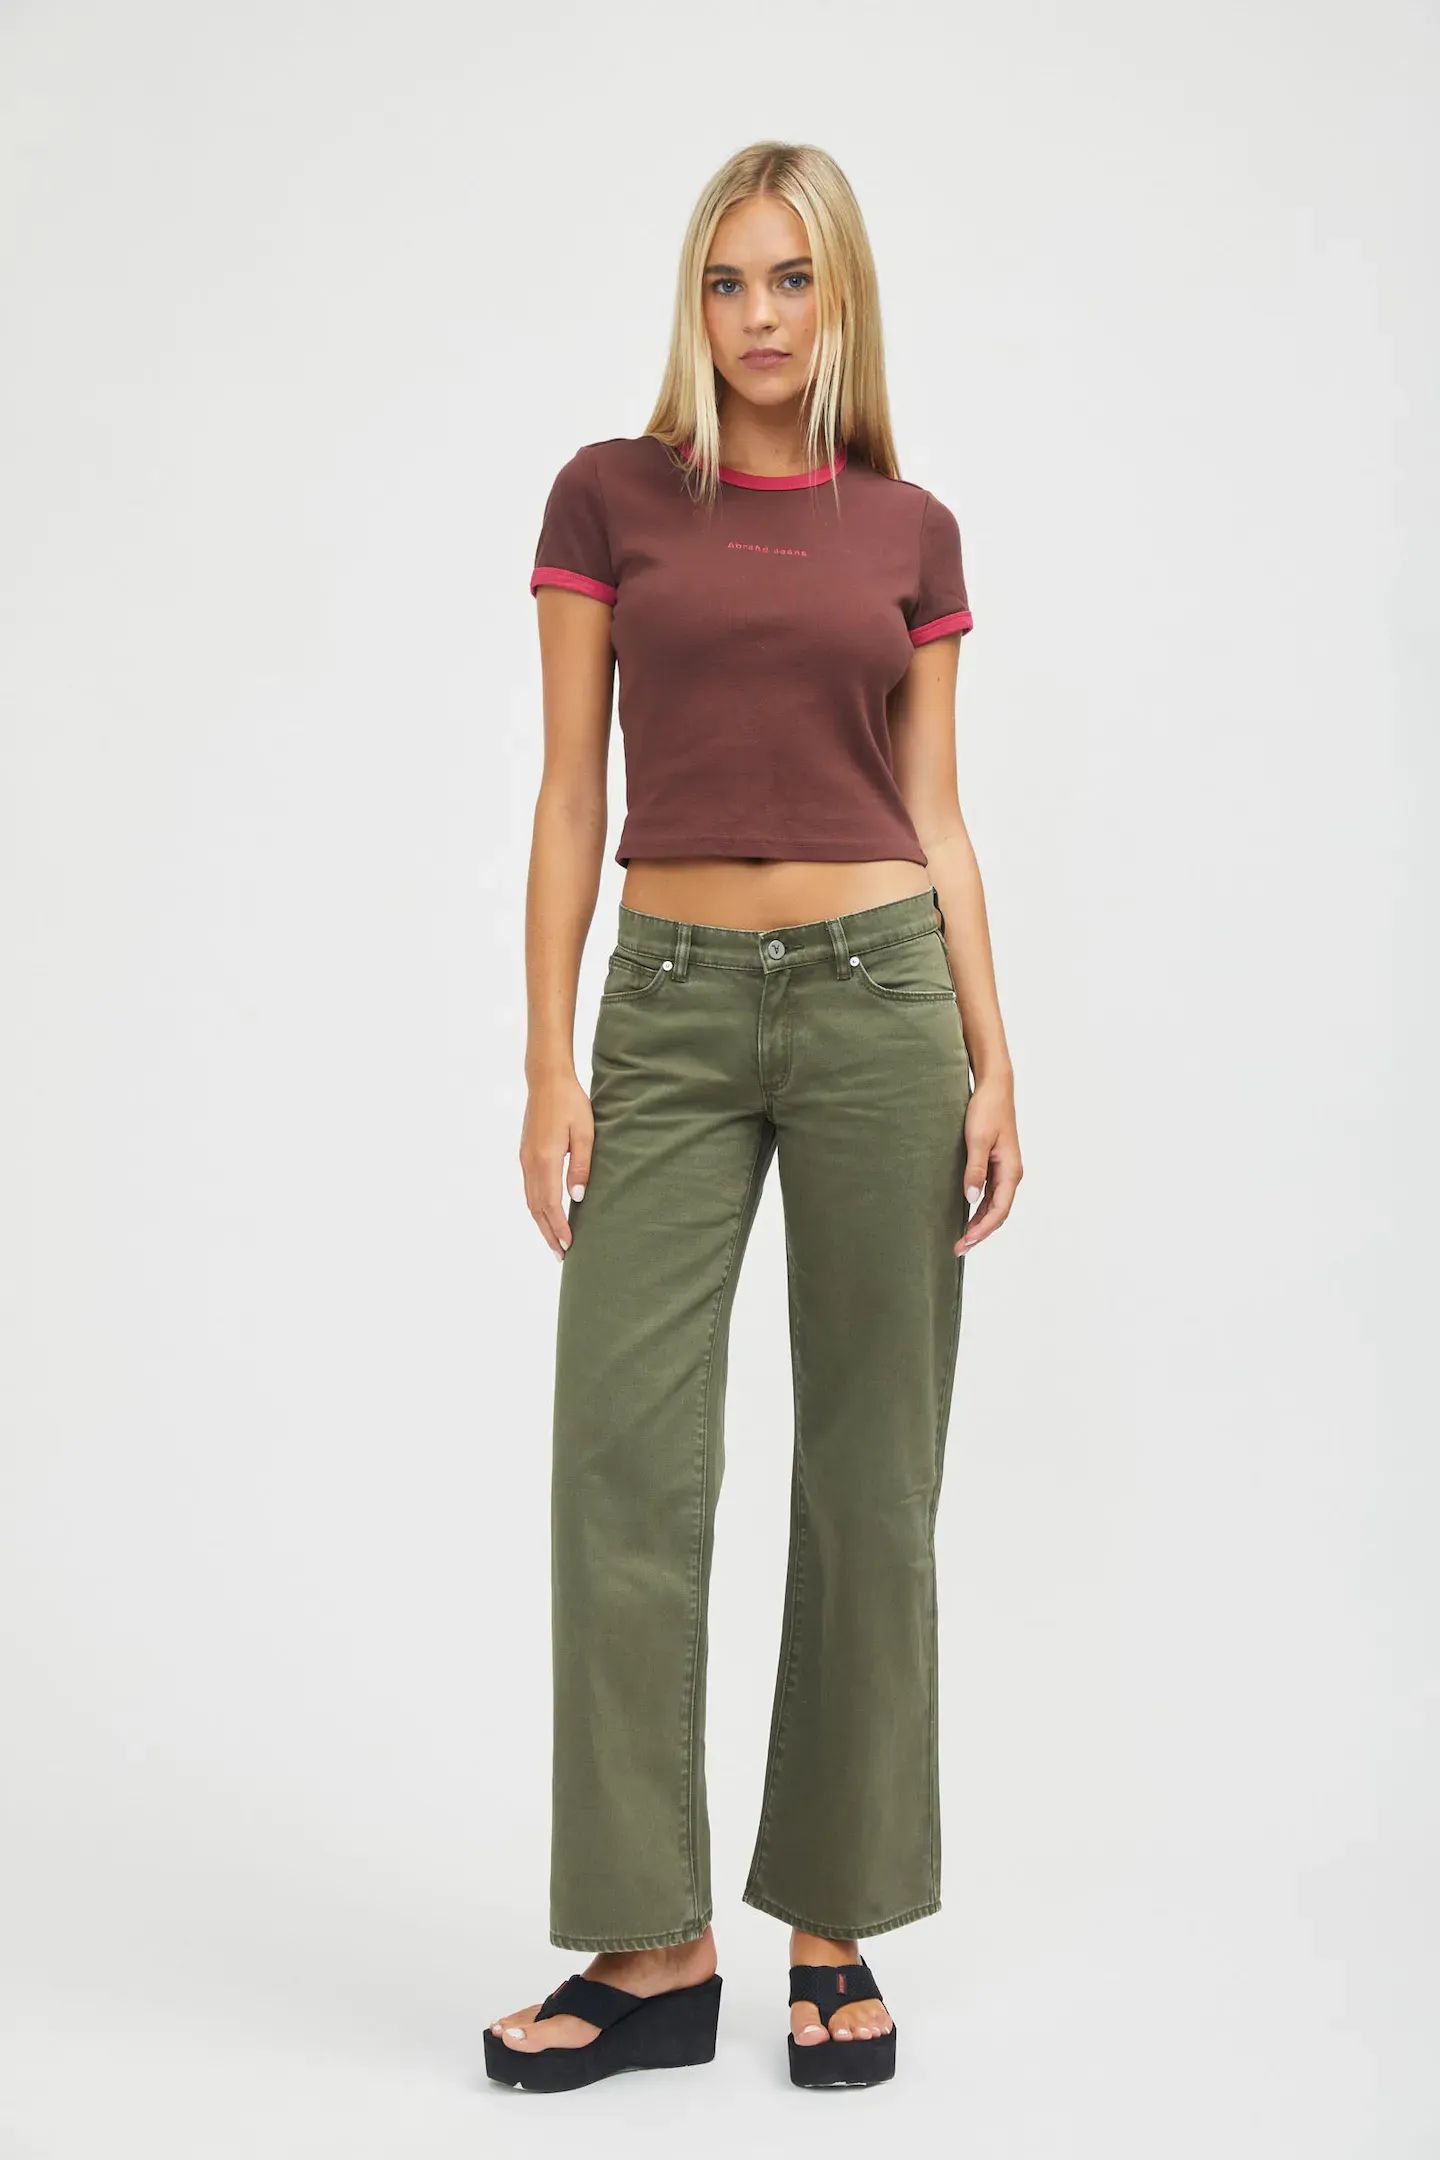 99 Low & Wide Army Green | Abrand Jeans APAC